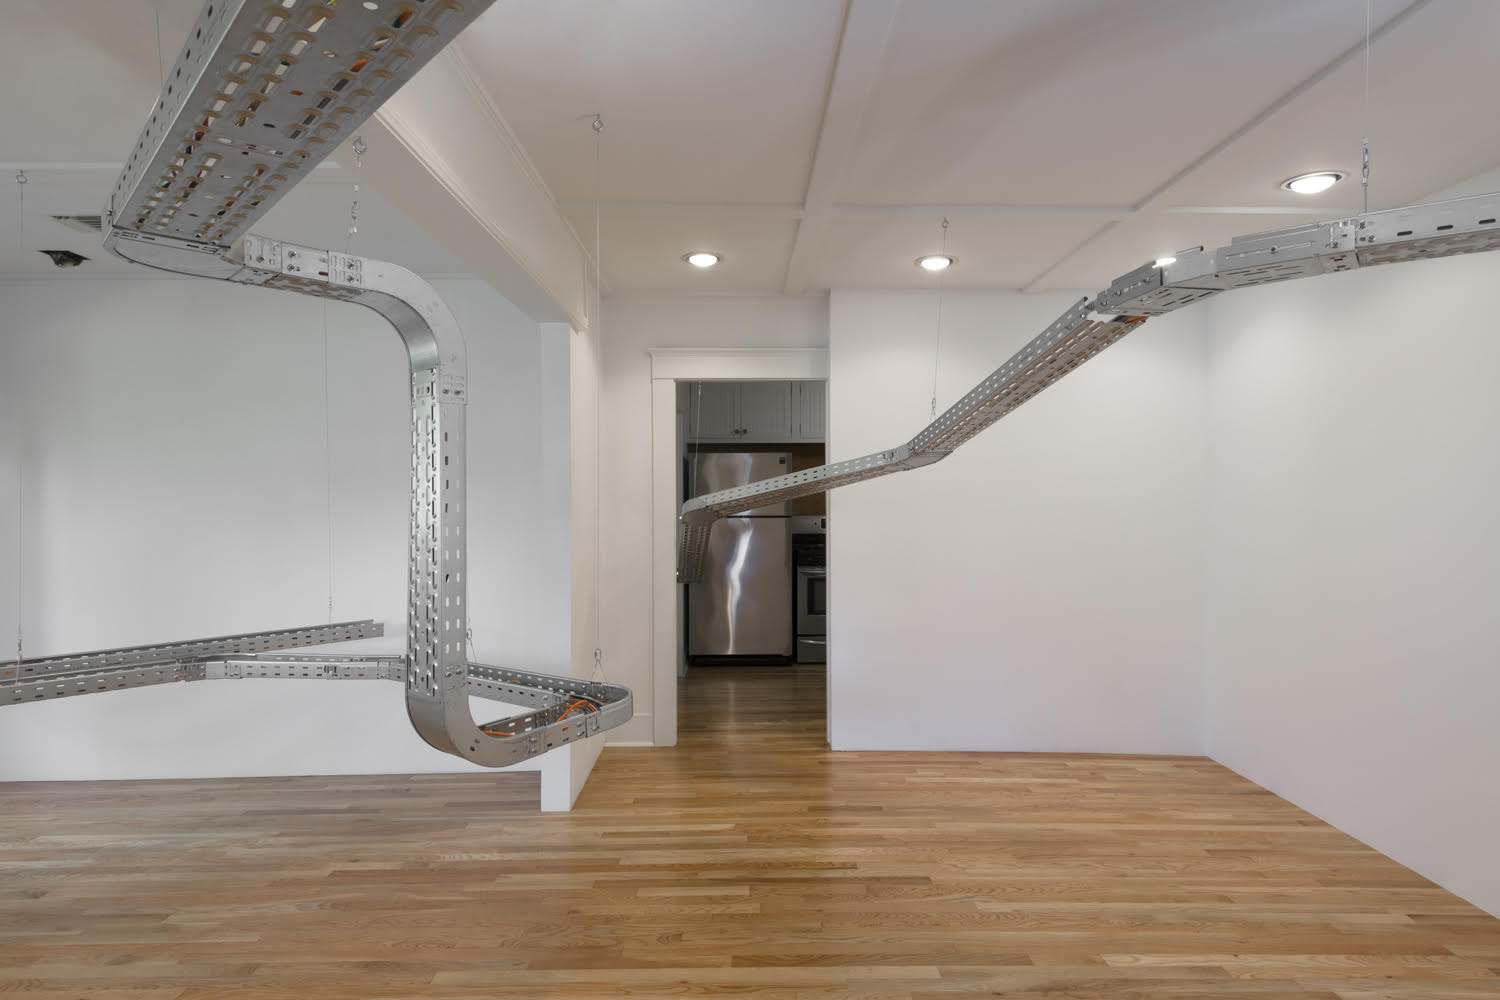 Eva And Franco Mattes Turn Cable Trays Into Art At Venice S